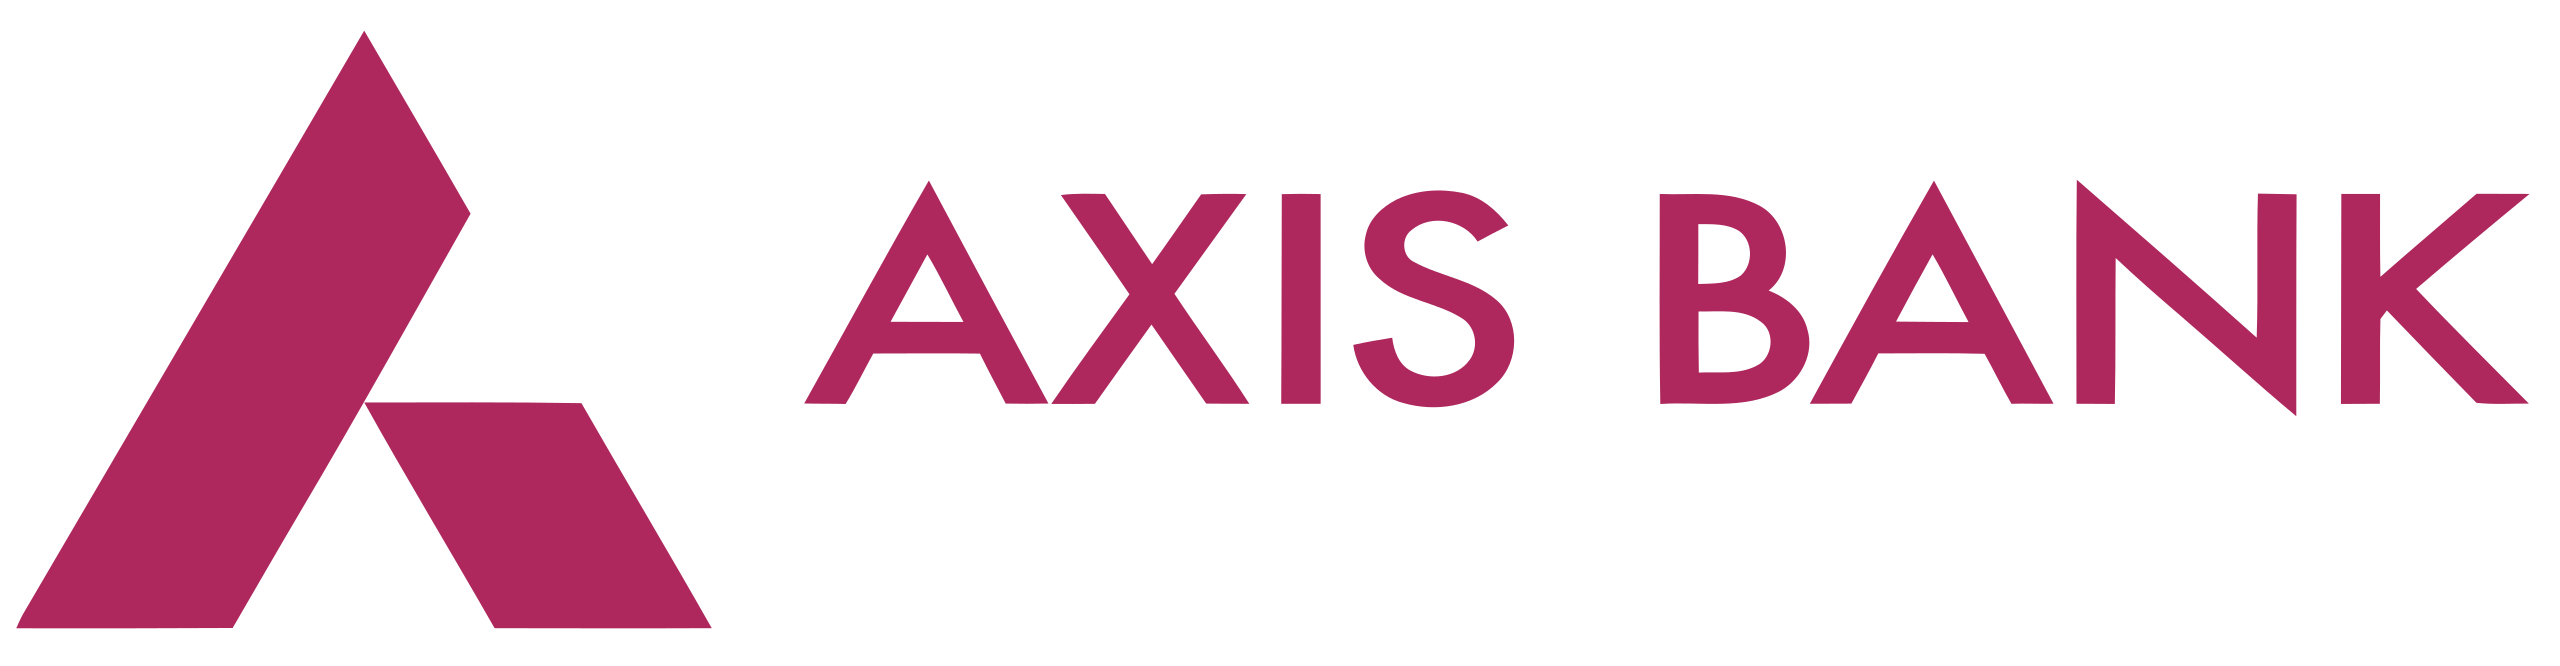 Axis Bank Indian Oil Credit Card Review – CardExpert